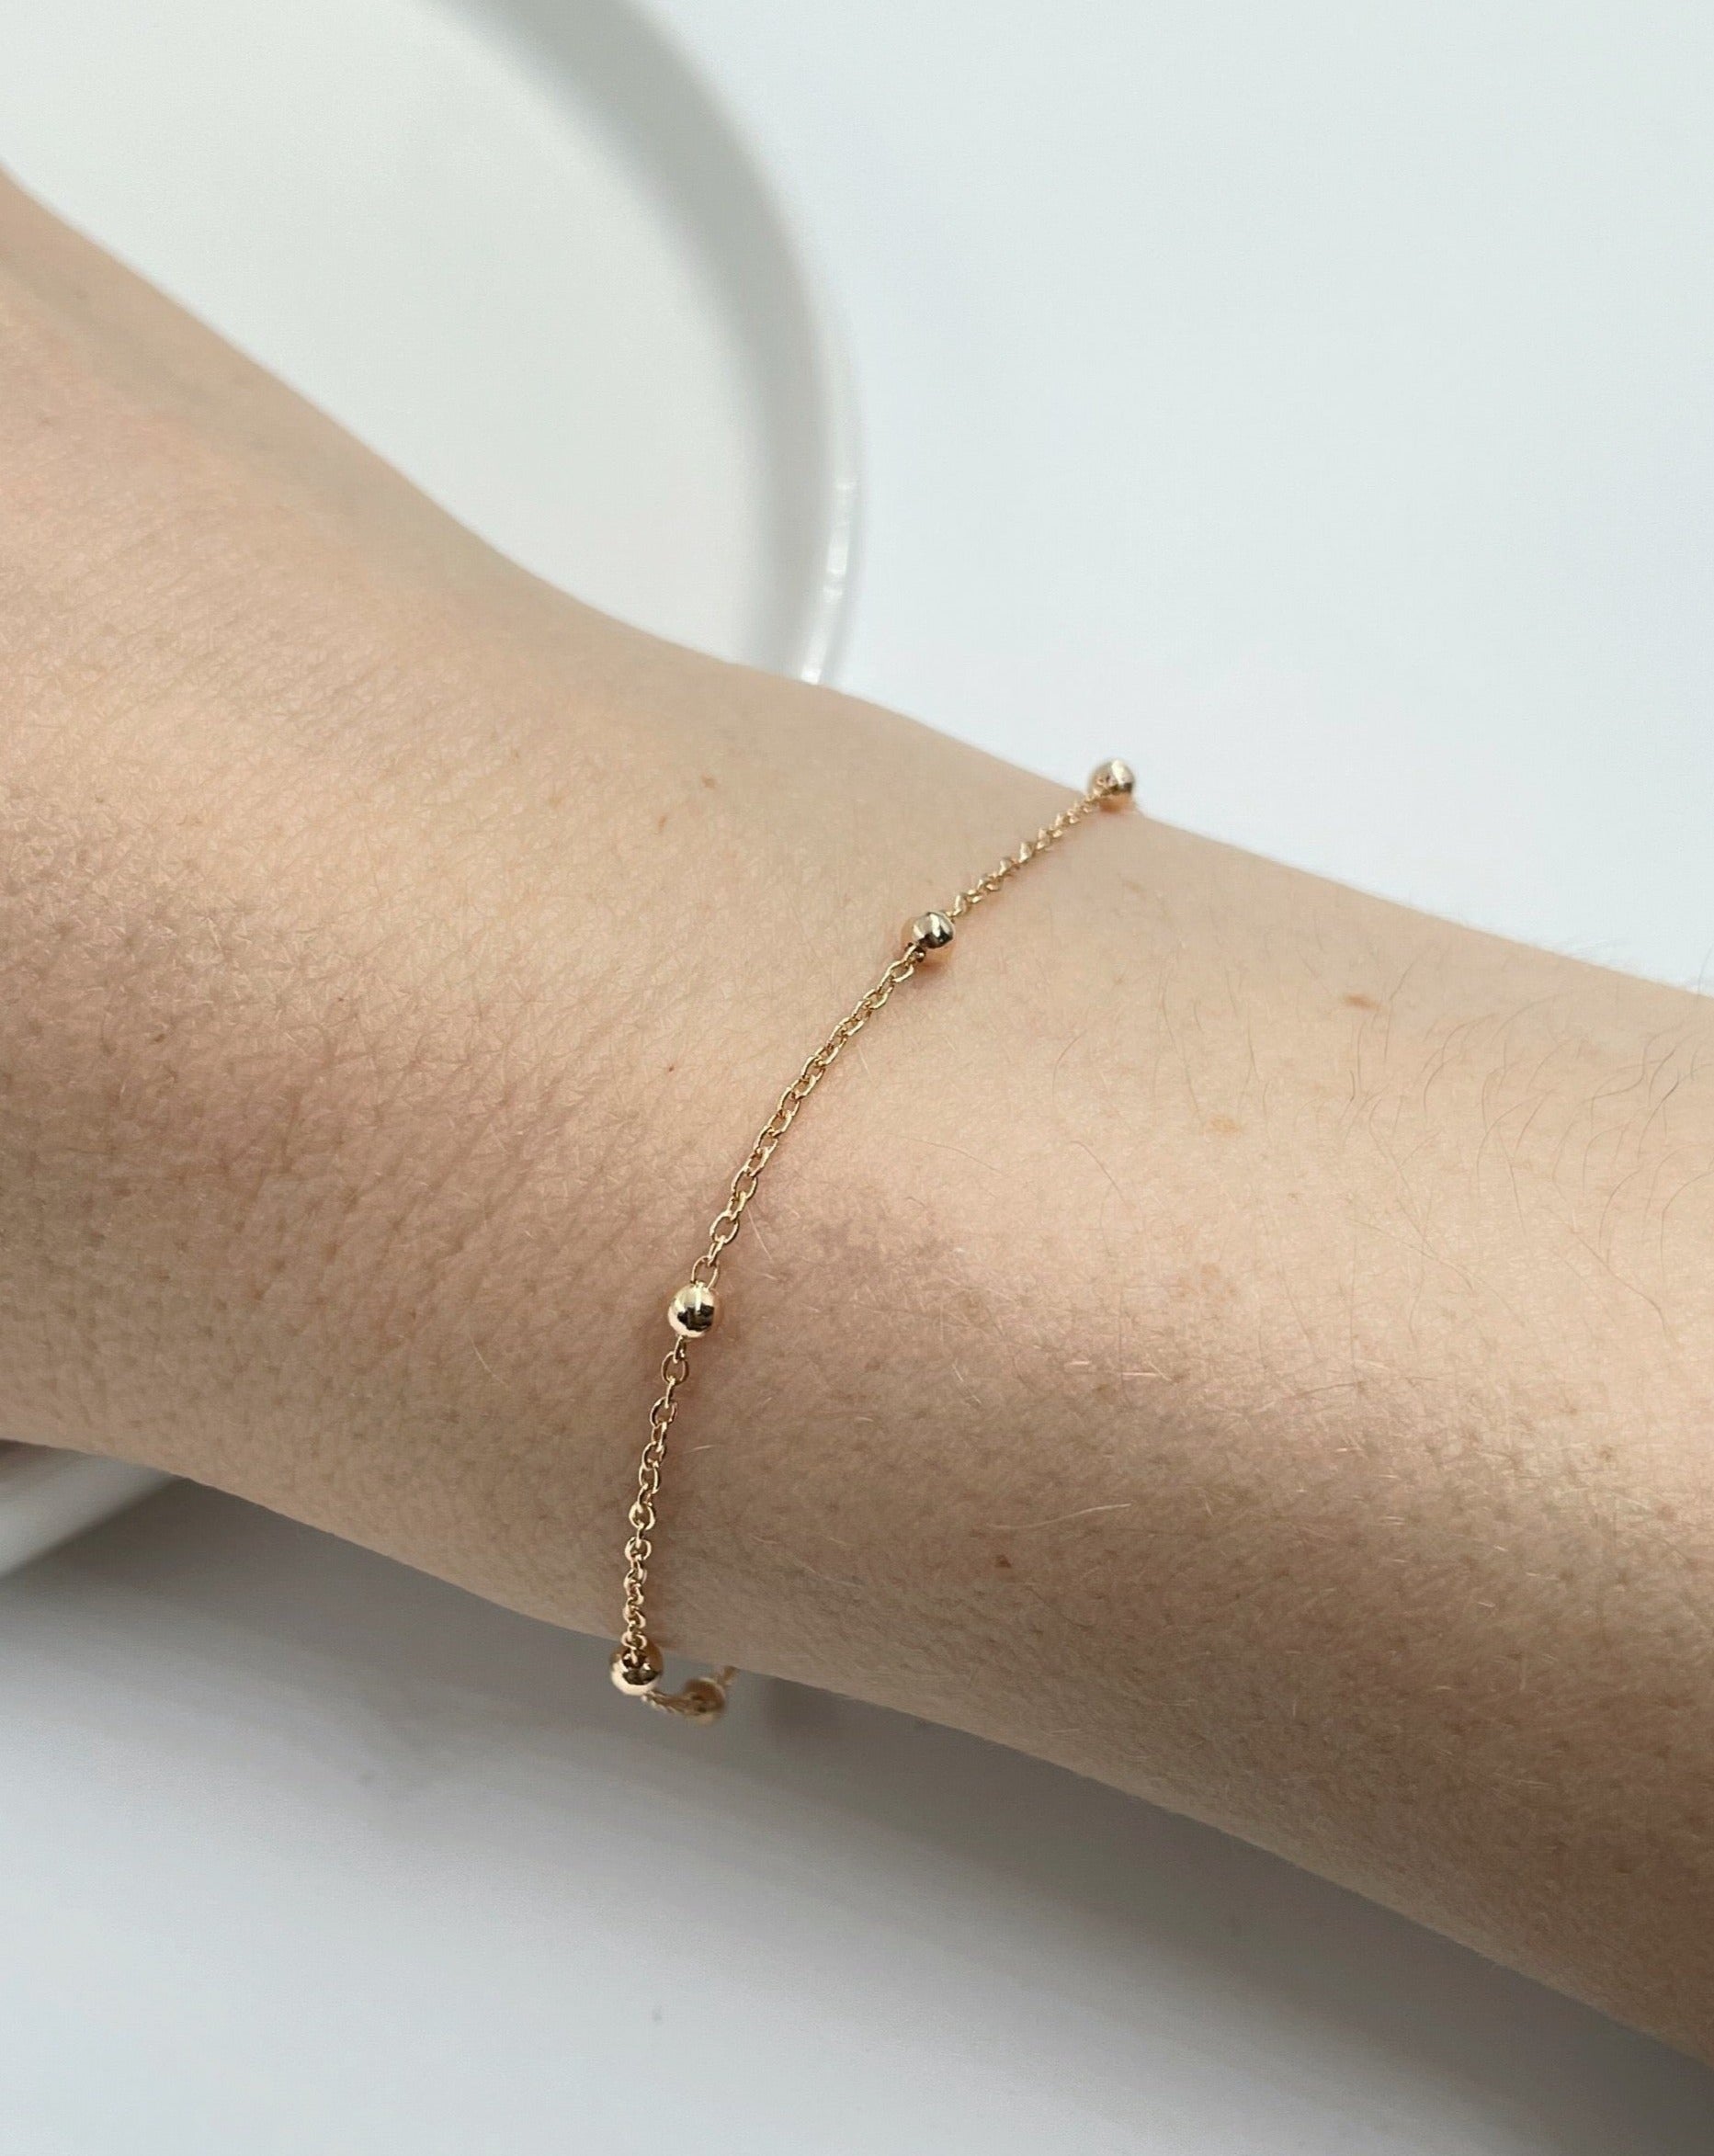 9kt gold Beaded Bracelet from Collective & Co. online jewellery store